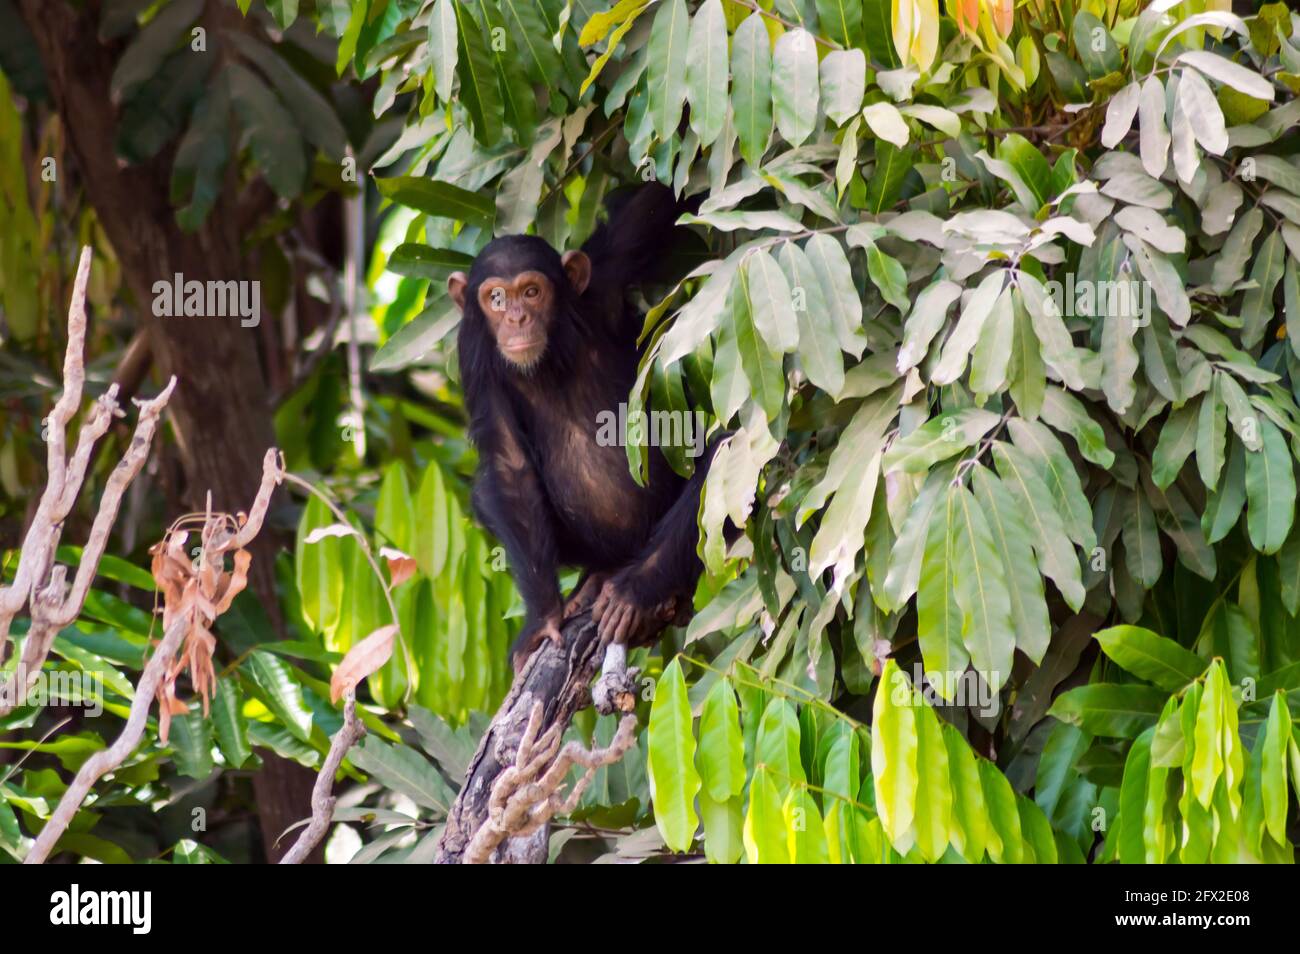 Africa, Gambia, Gambia National Park, Ngogo Chimpanzee Project. A young adolescent male chimpanzee rests in a tree. Stock Photo